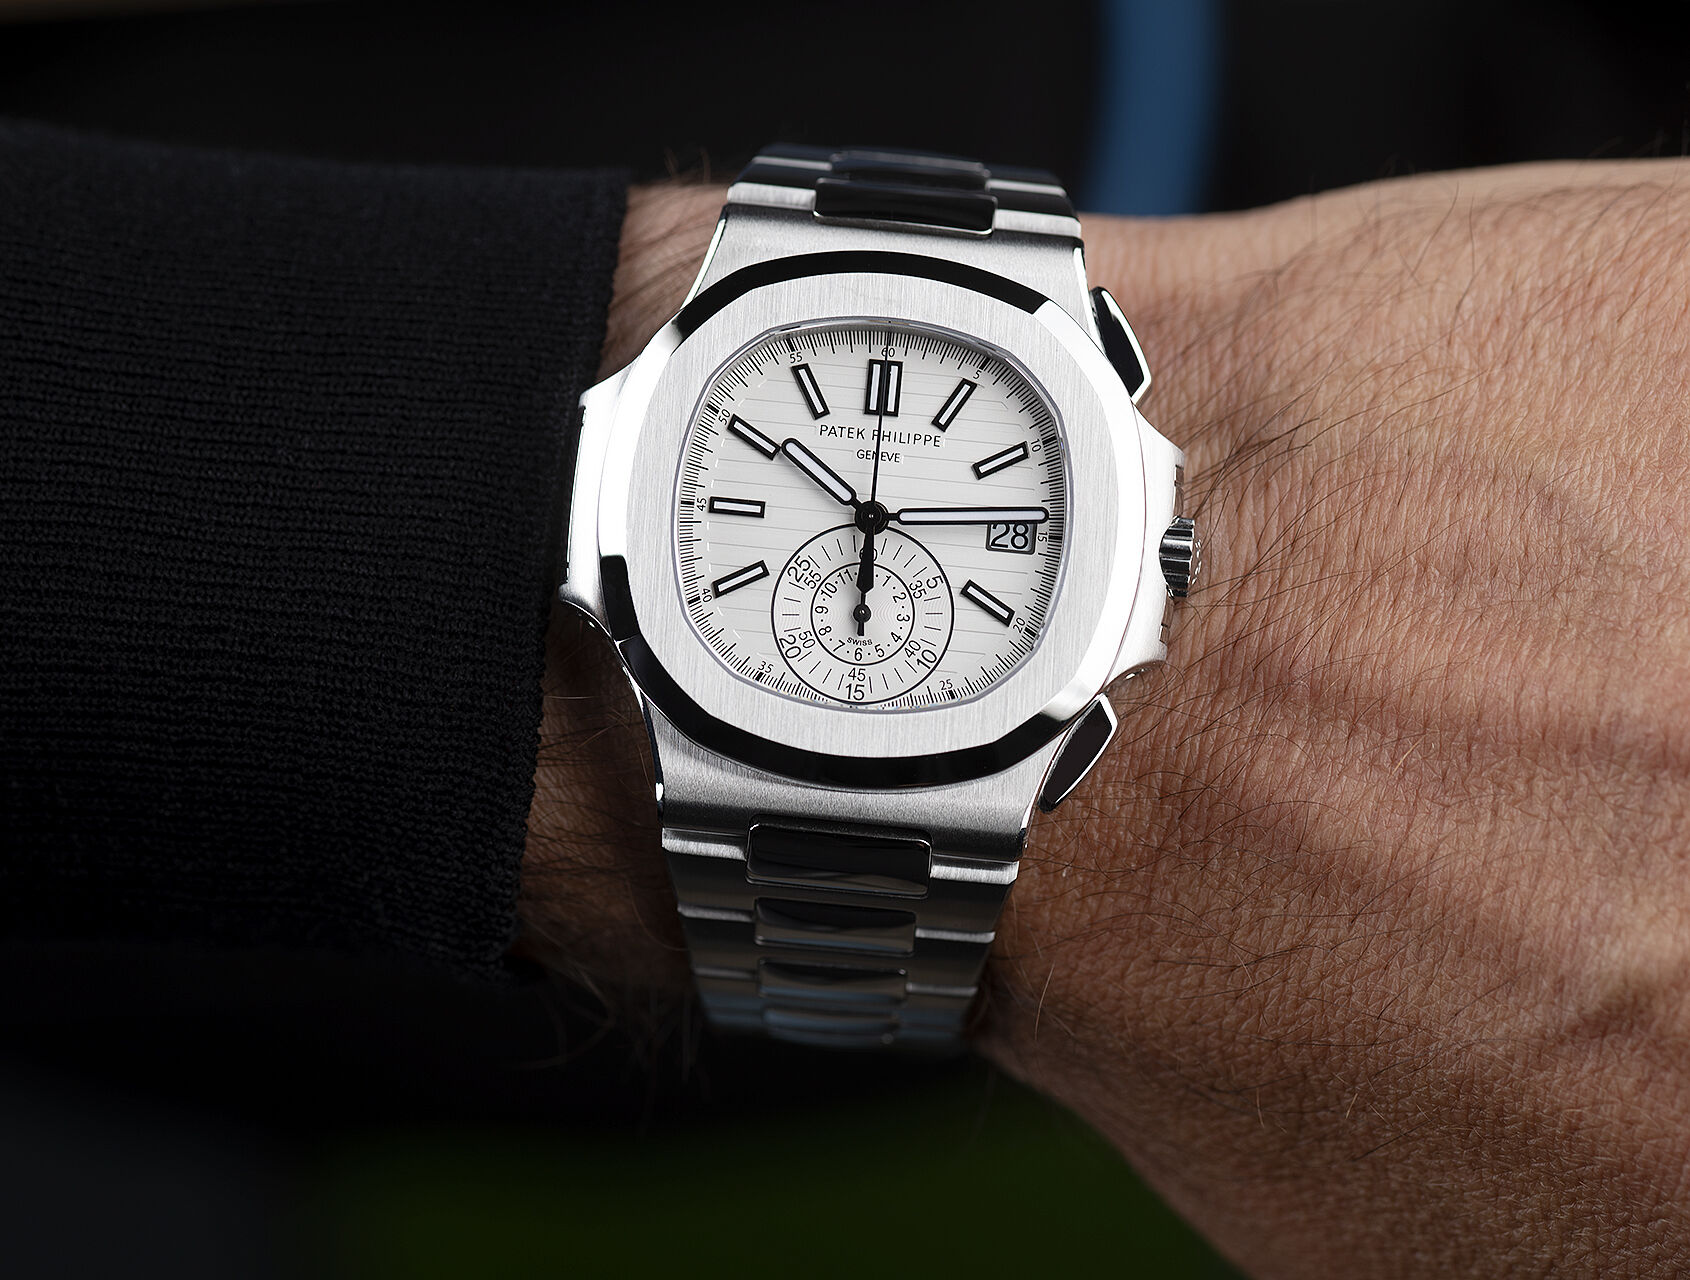 ref 5980/1A-019 | 5980/1A-019 - Fly-Back | Patek Philippe Nautilus Chronograph